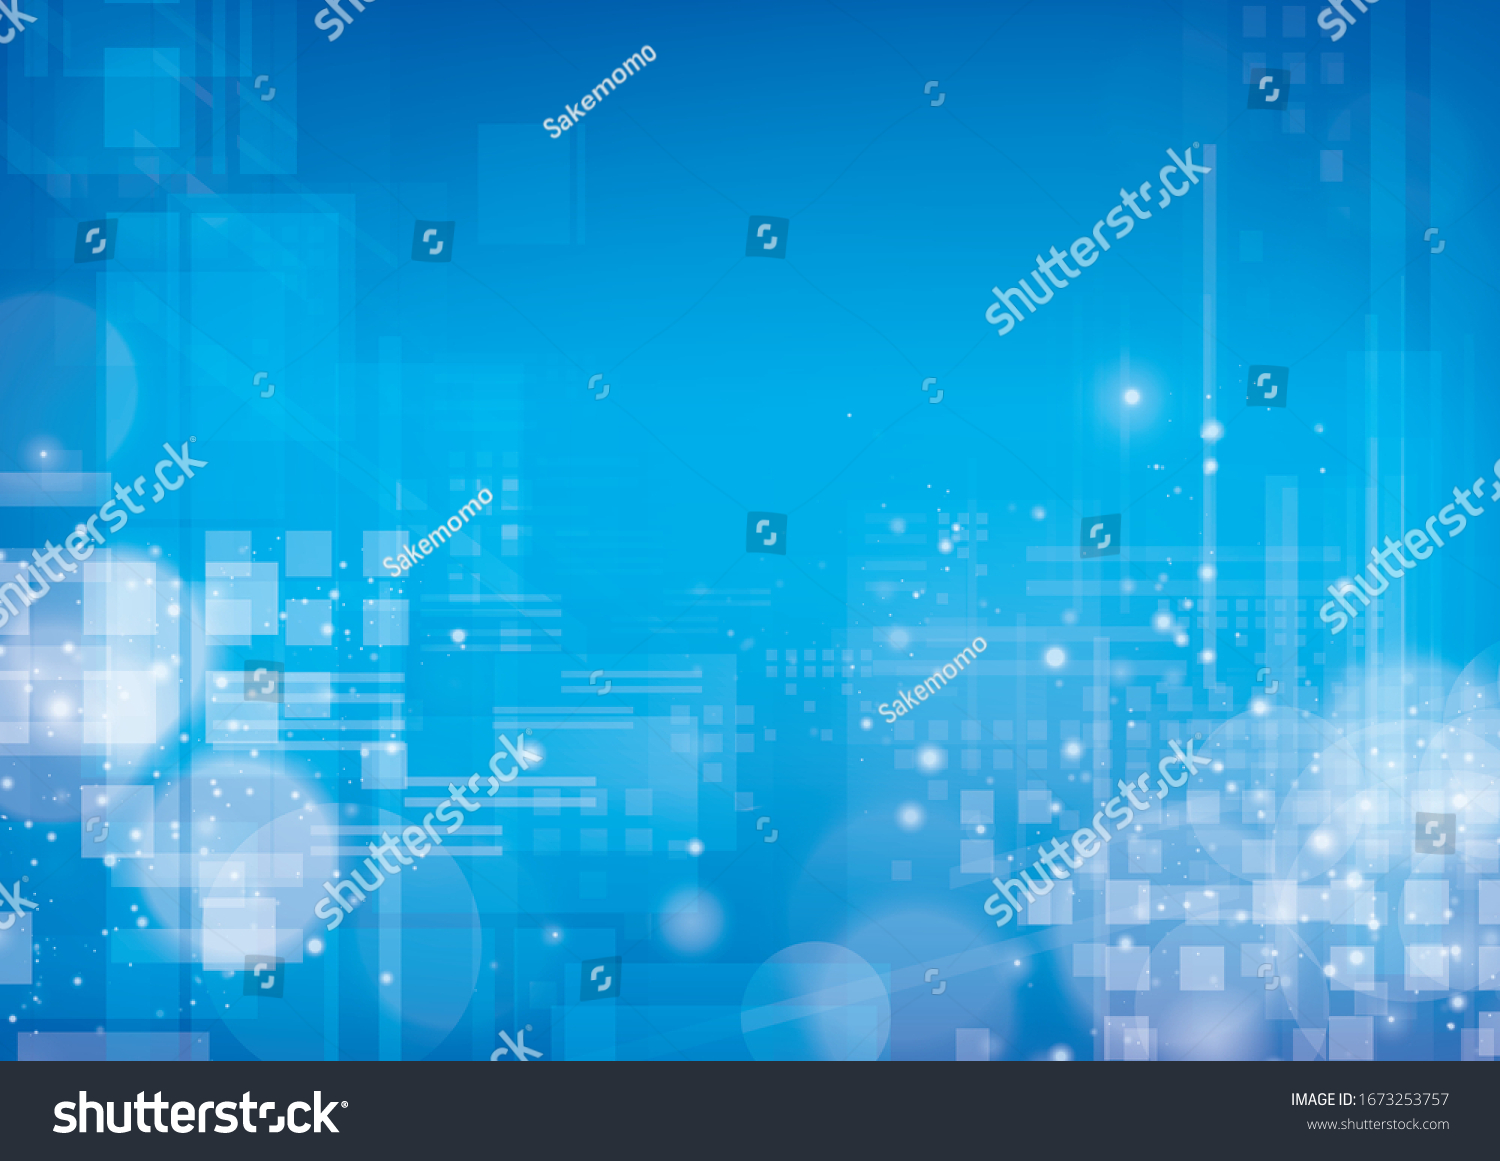 abstract blue background
. vector digital image. #1673253757